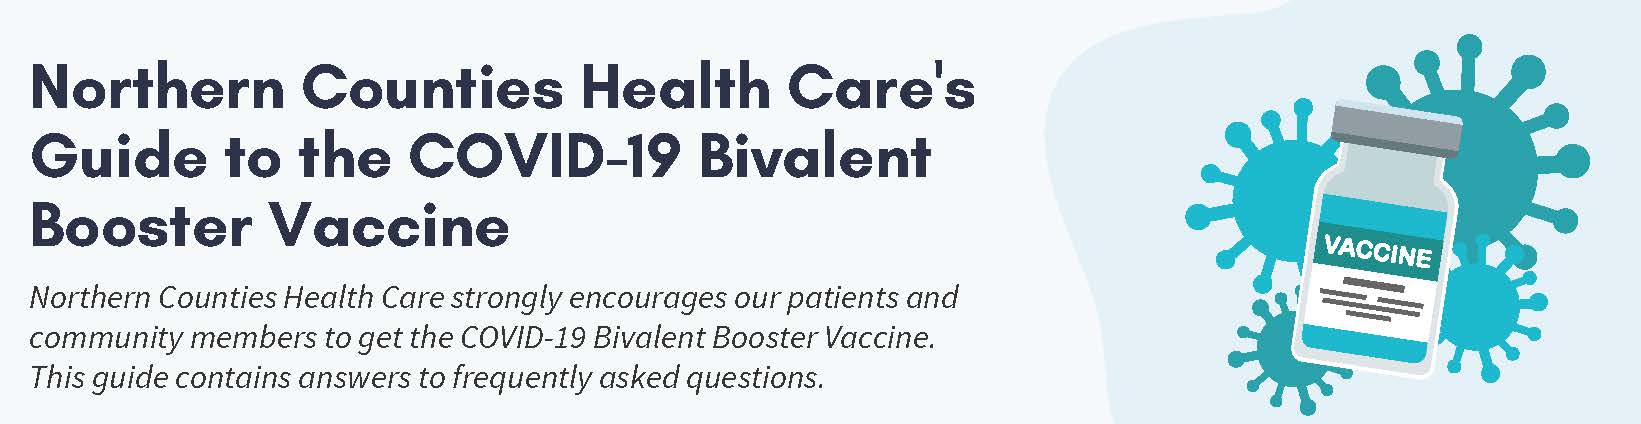 Image announcing guide to bivalent vaccines